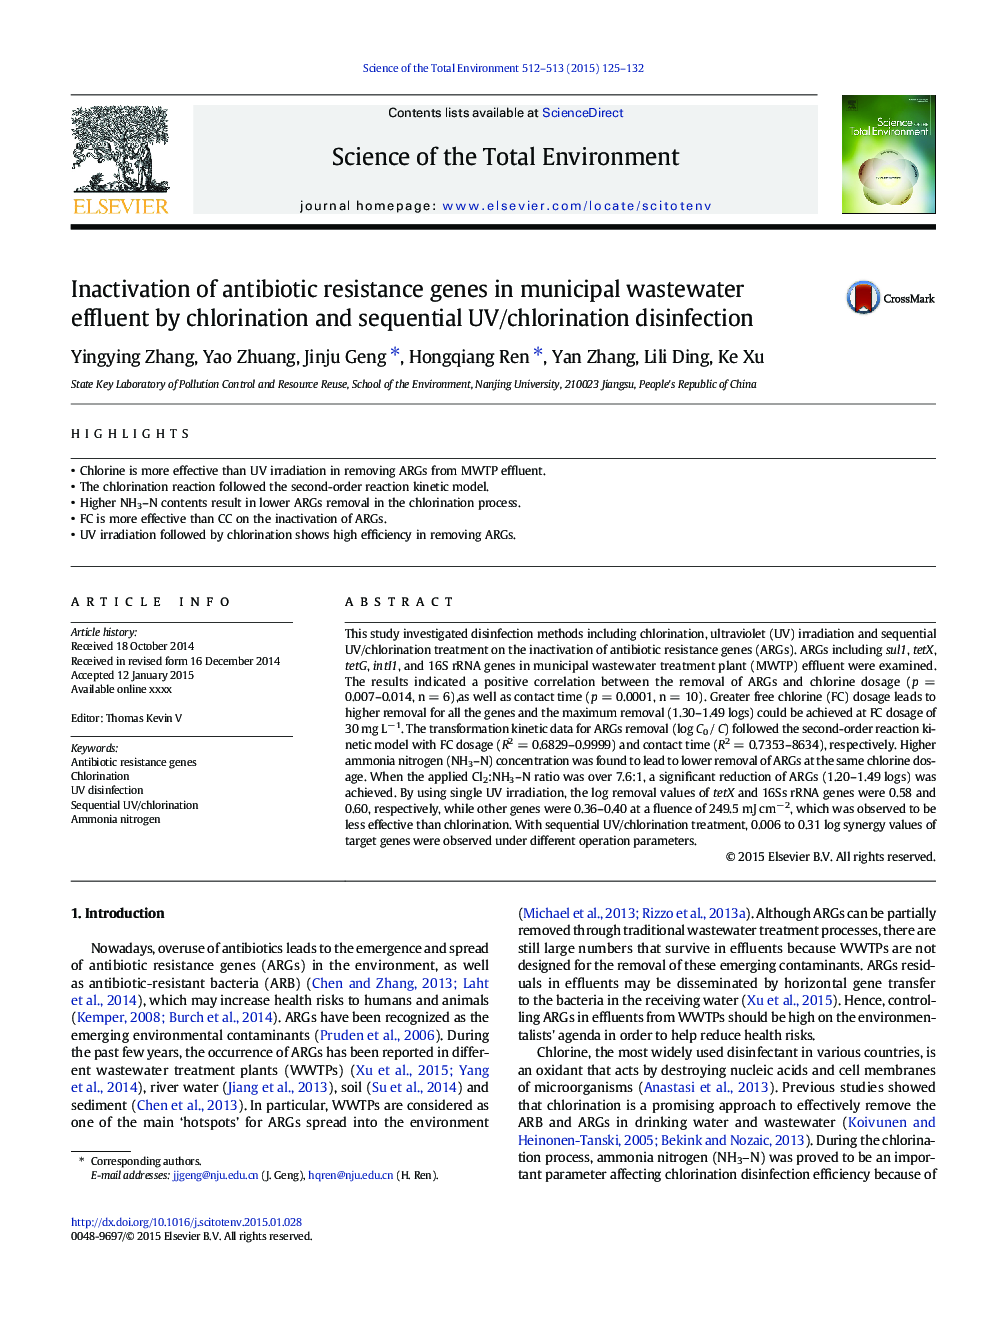 Inactivation of antibiotic resistance genes in municipal wastewater effluent by chlorination and sequential UV/chlorination disinfection